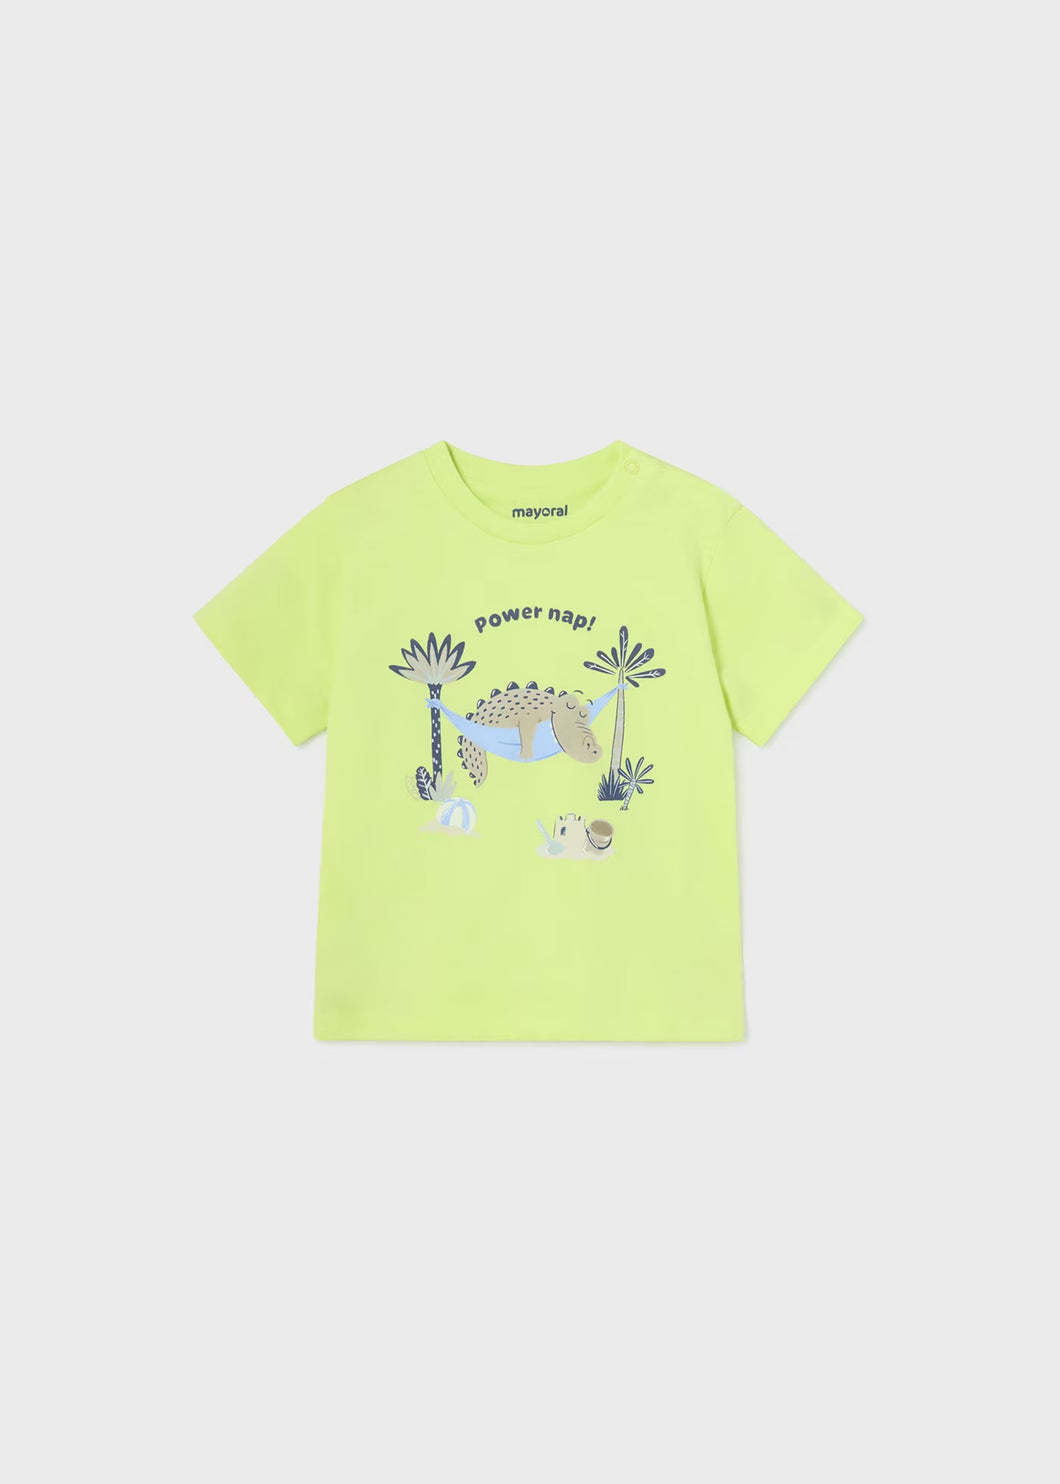 Mayoral Baby Boy Short Sleeved Tee with “Power Nap/Sleepy Crocodile” Graphic: Size 6M to 24M